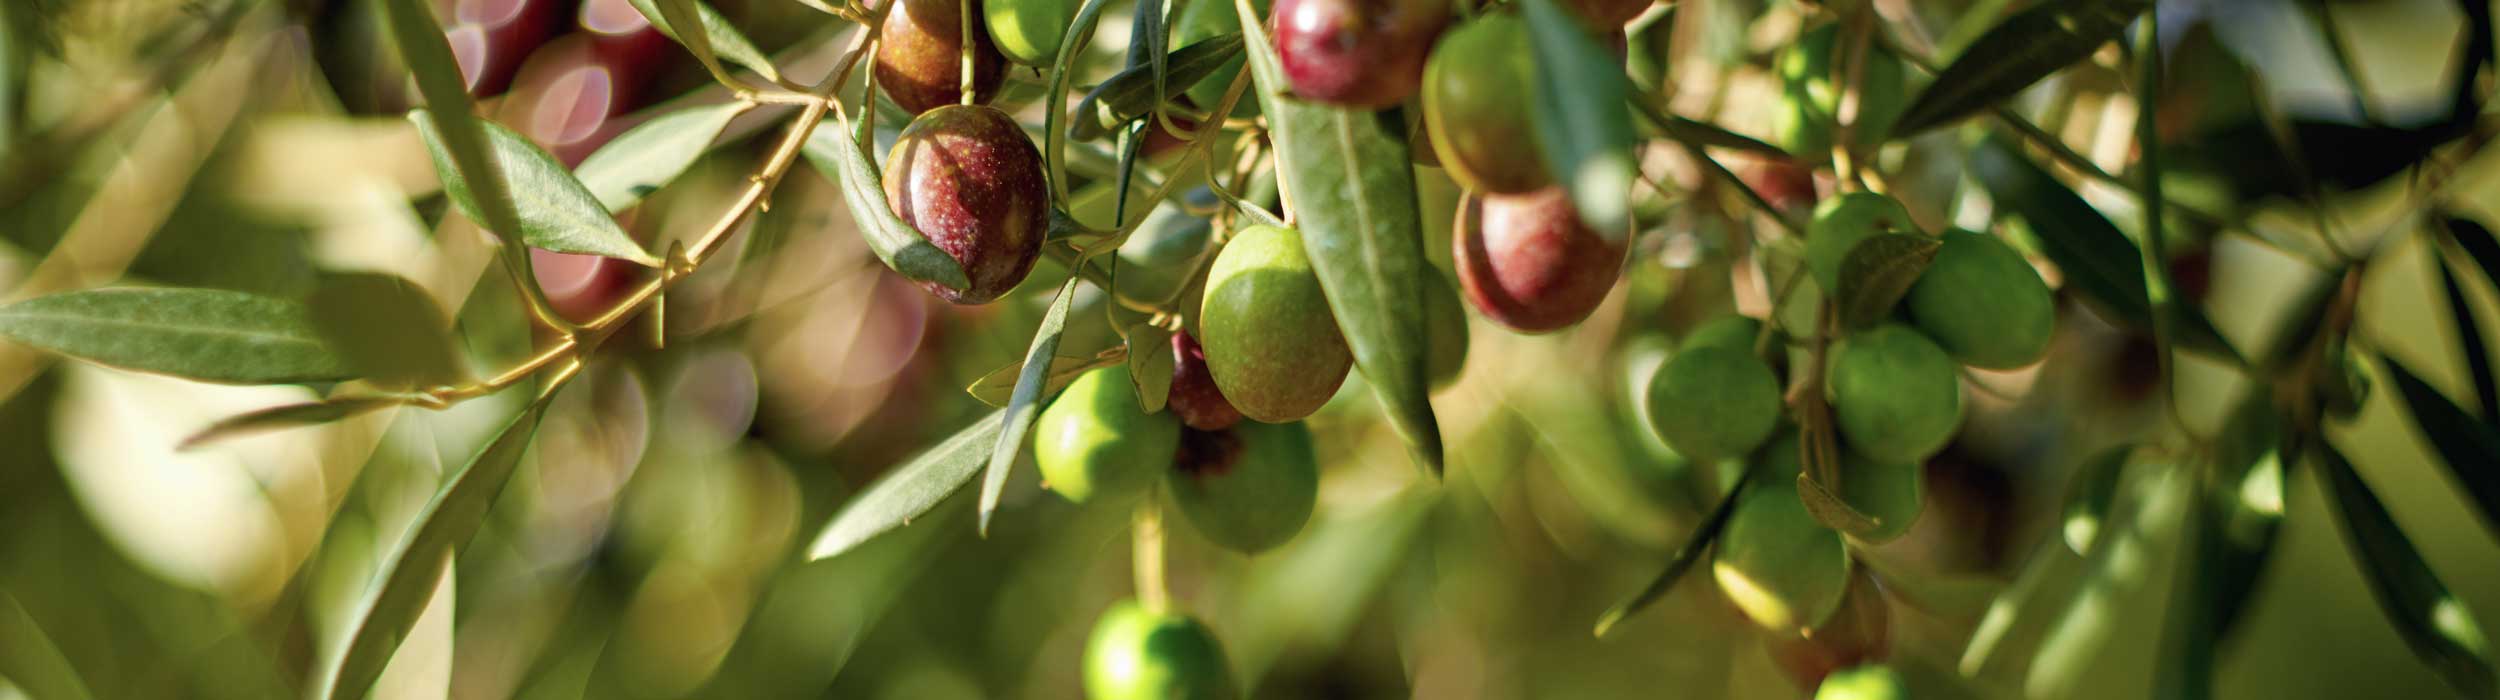 Olive fruit on branches in orchard